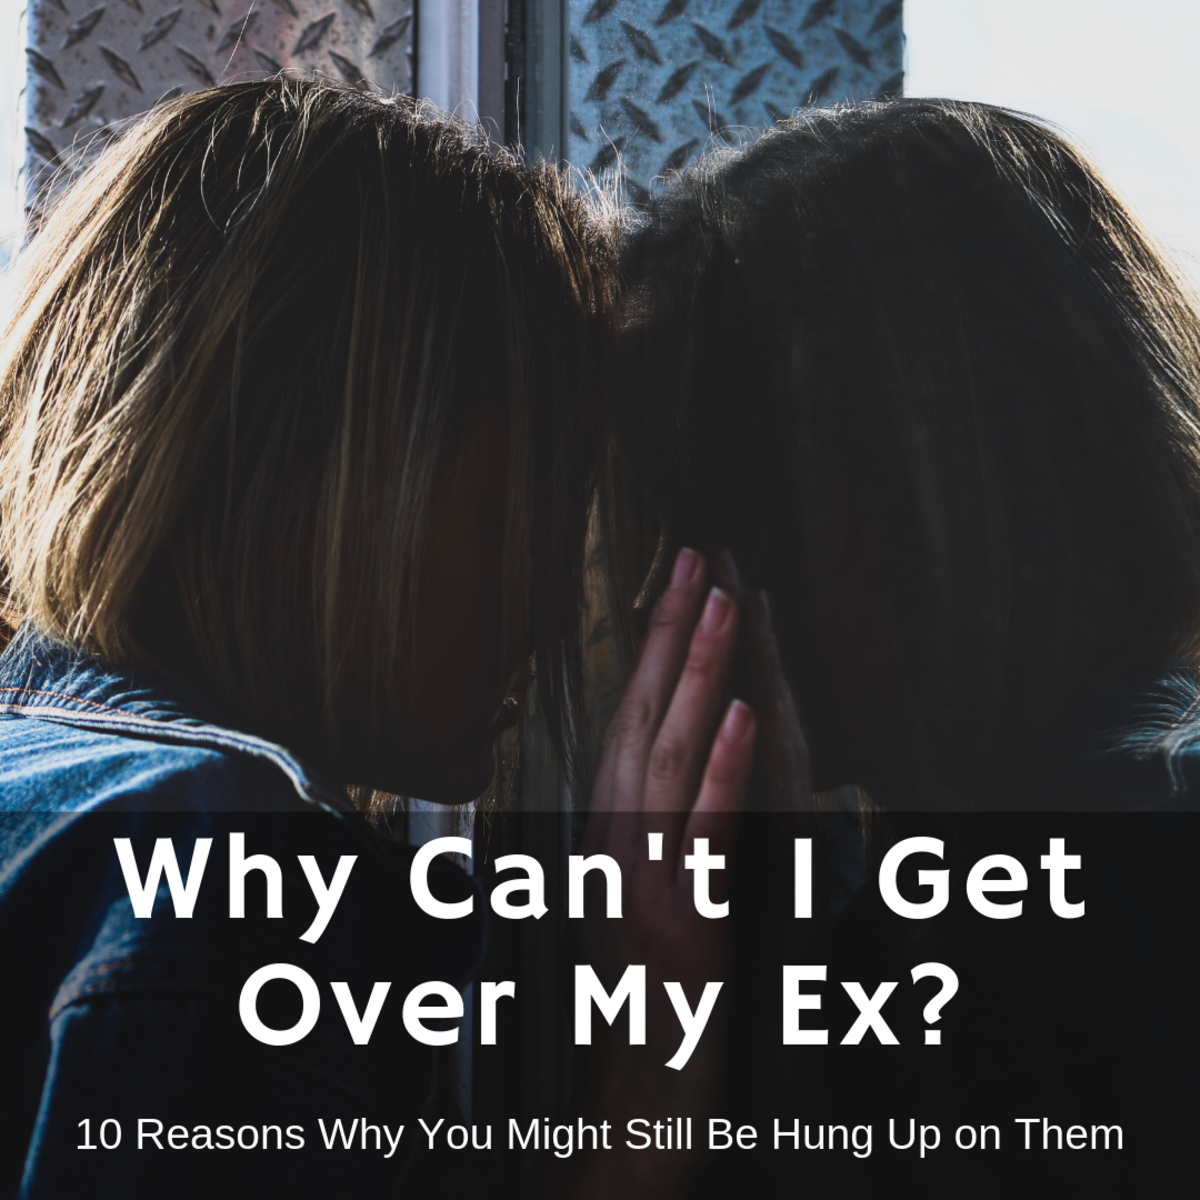 If you know it's over but just can't seem to get over your ex